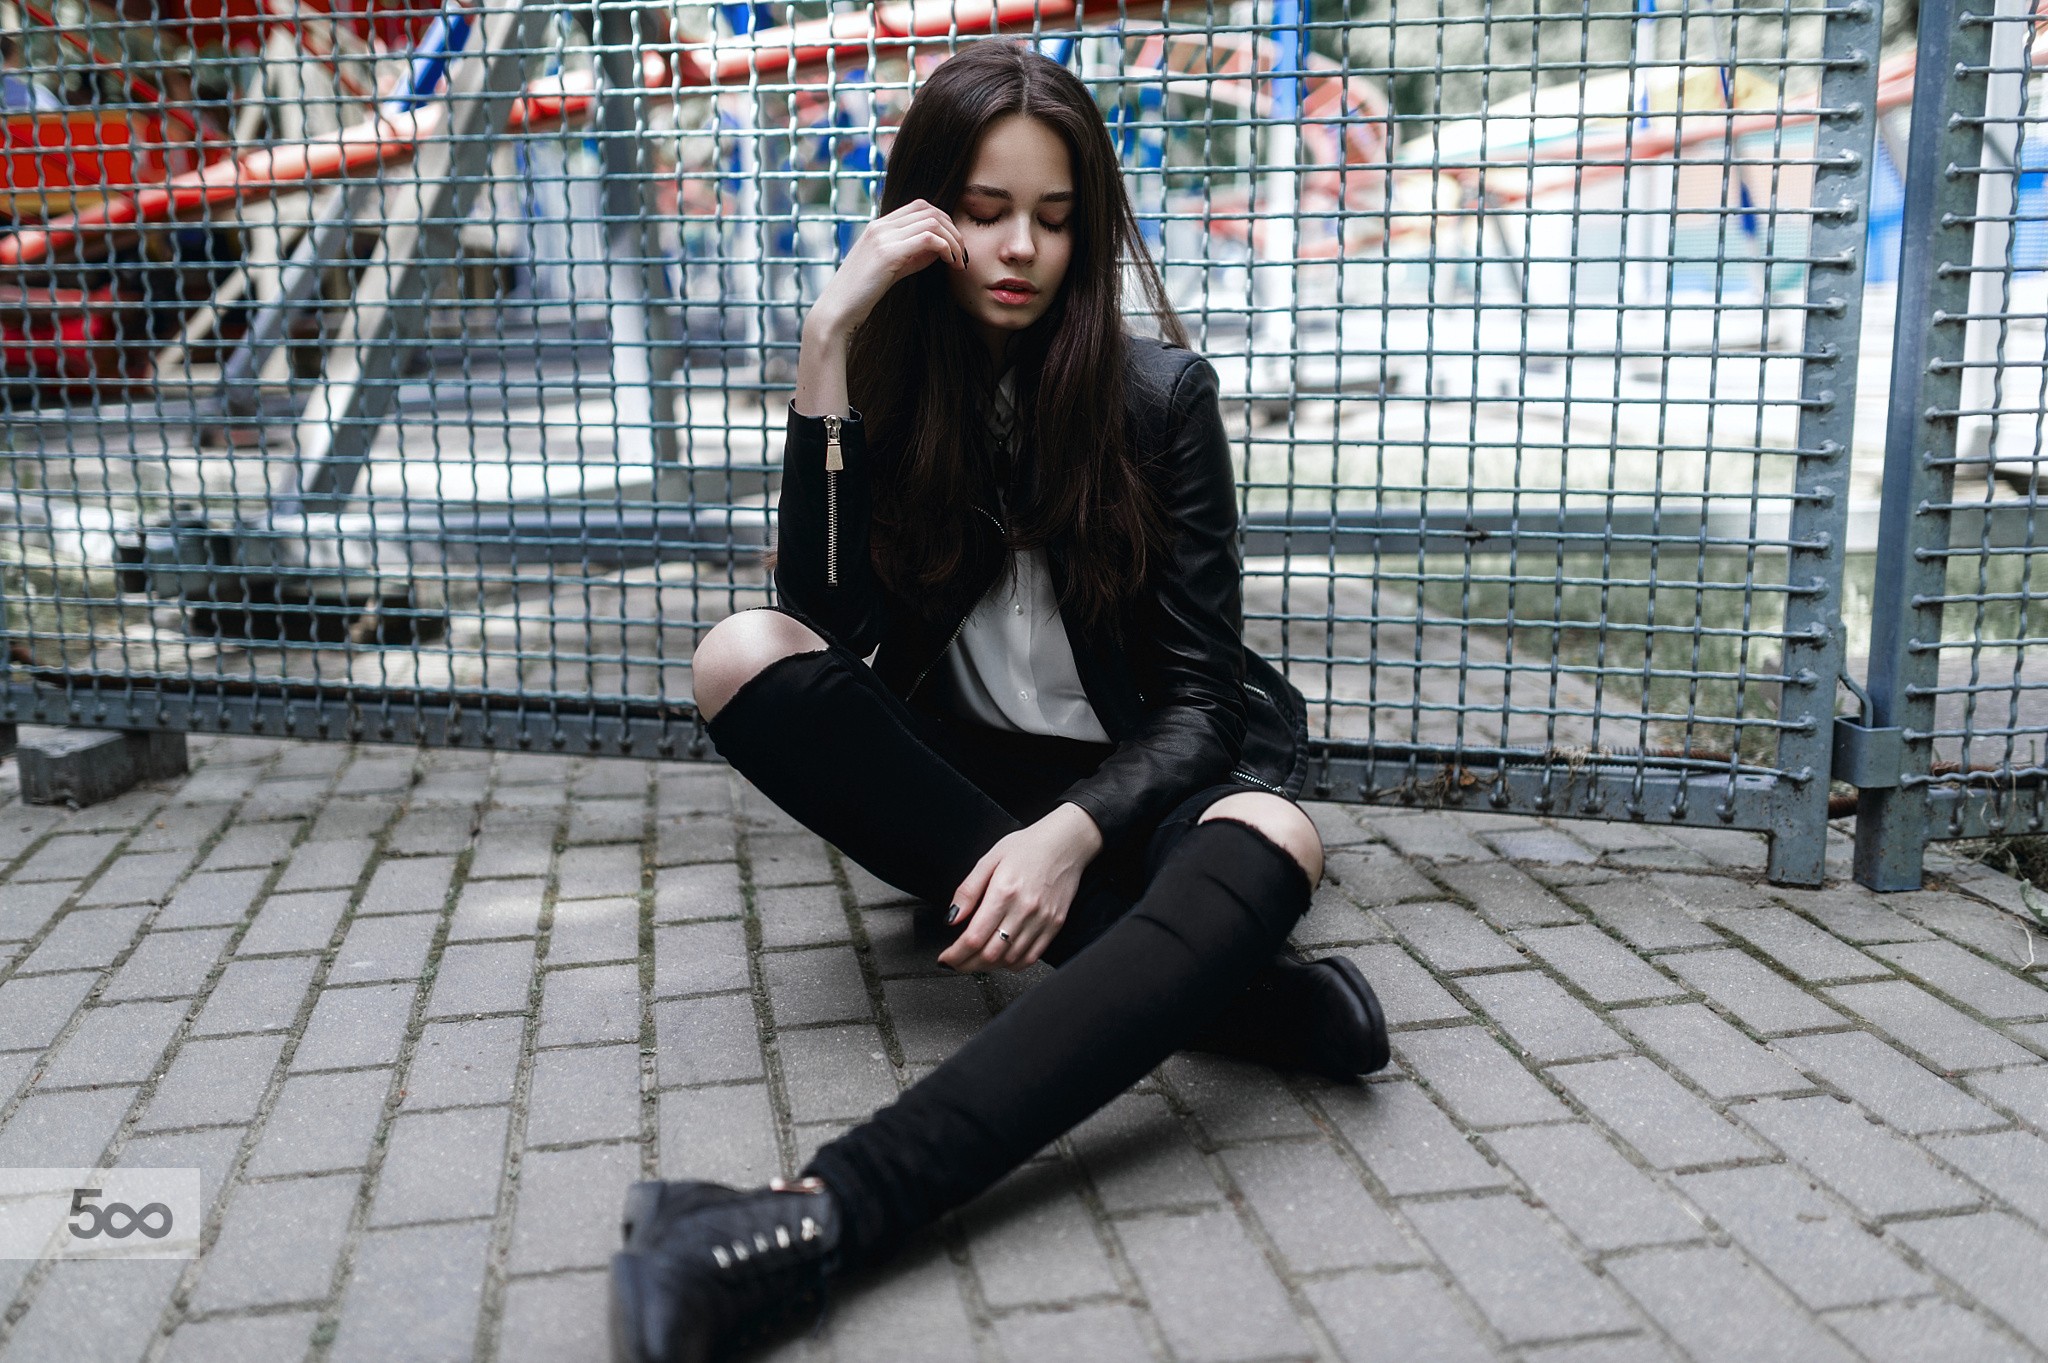 People 2048x1363 women sitting black stockings closed eyes leather jacket brunette painted nails black nails women outdoors makeup fence model